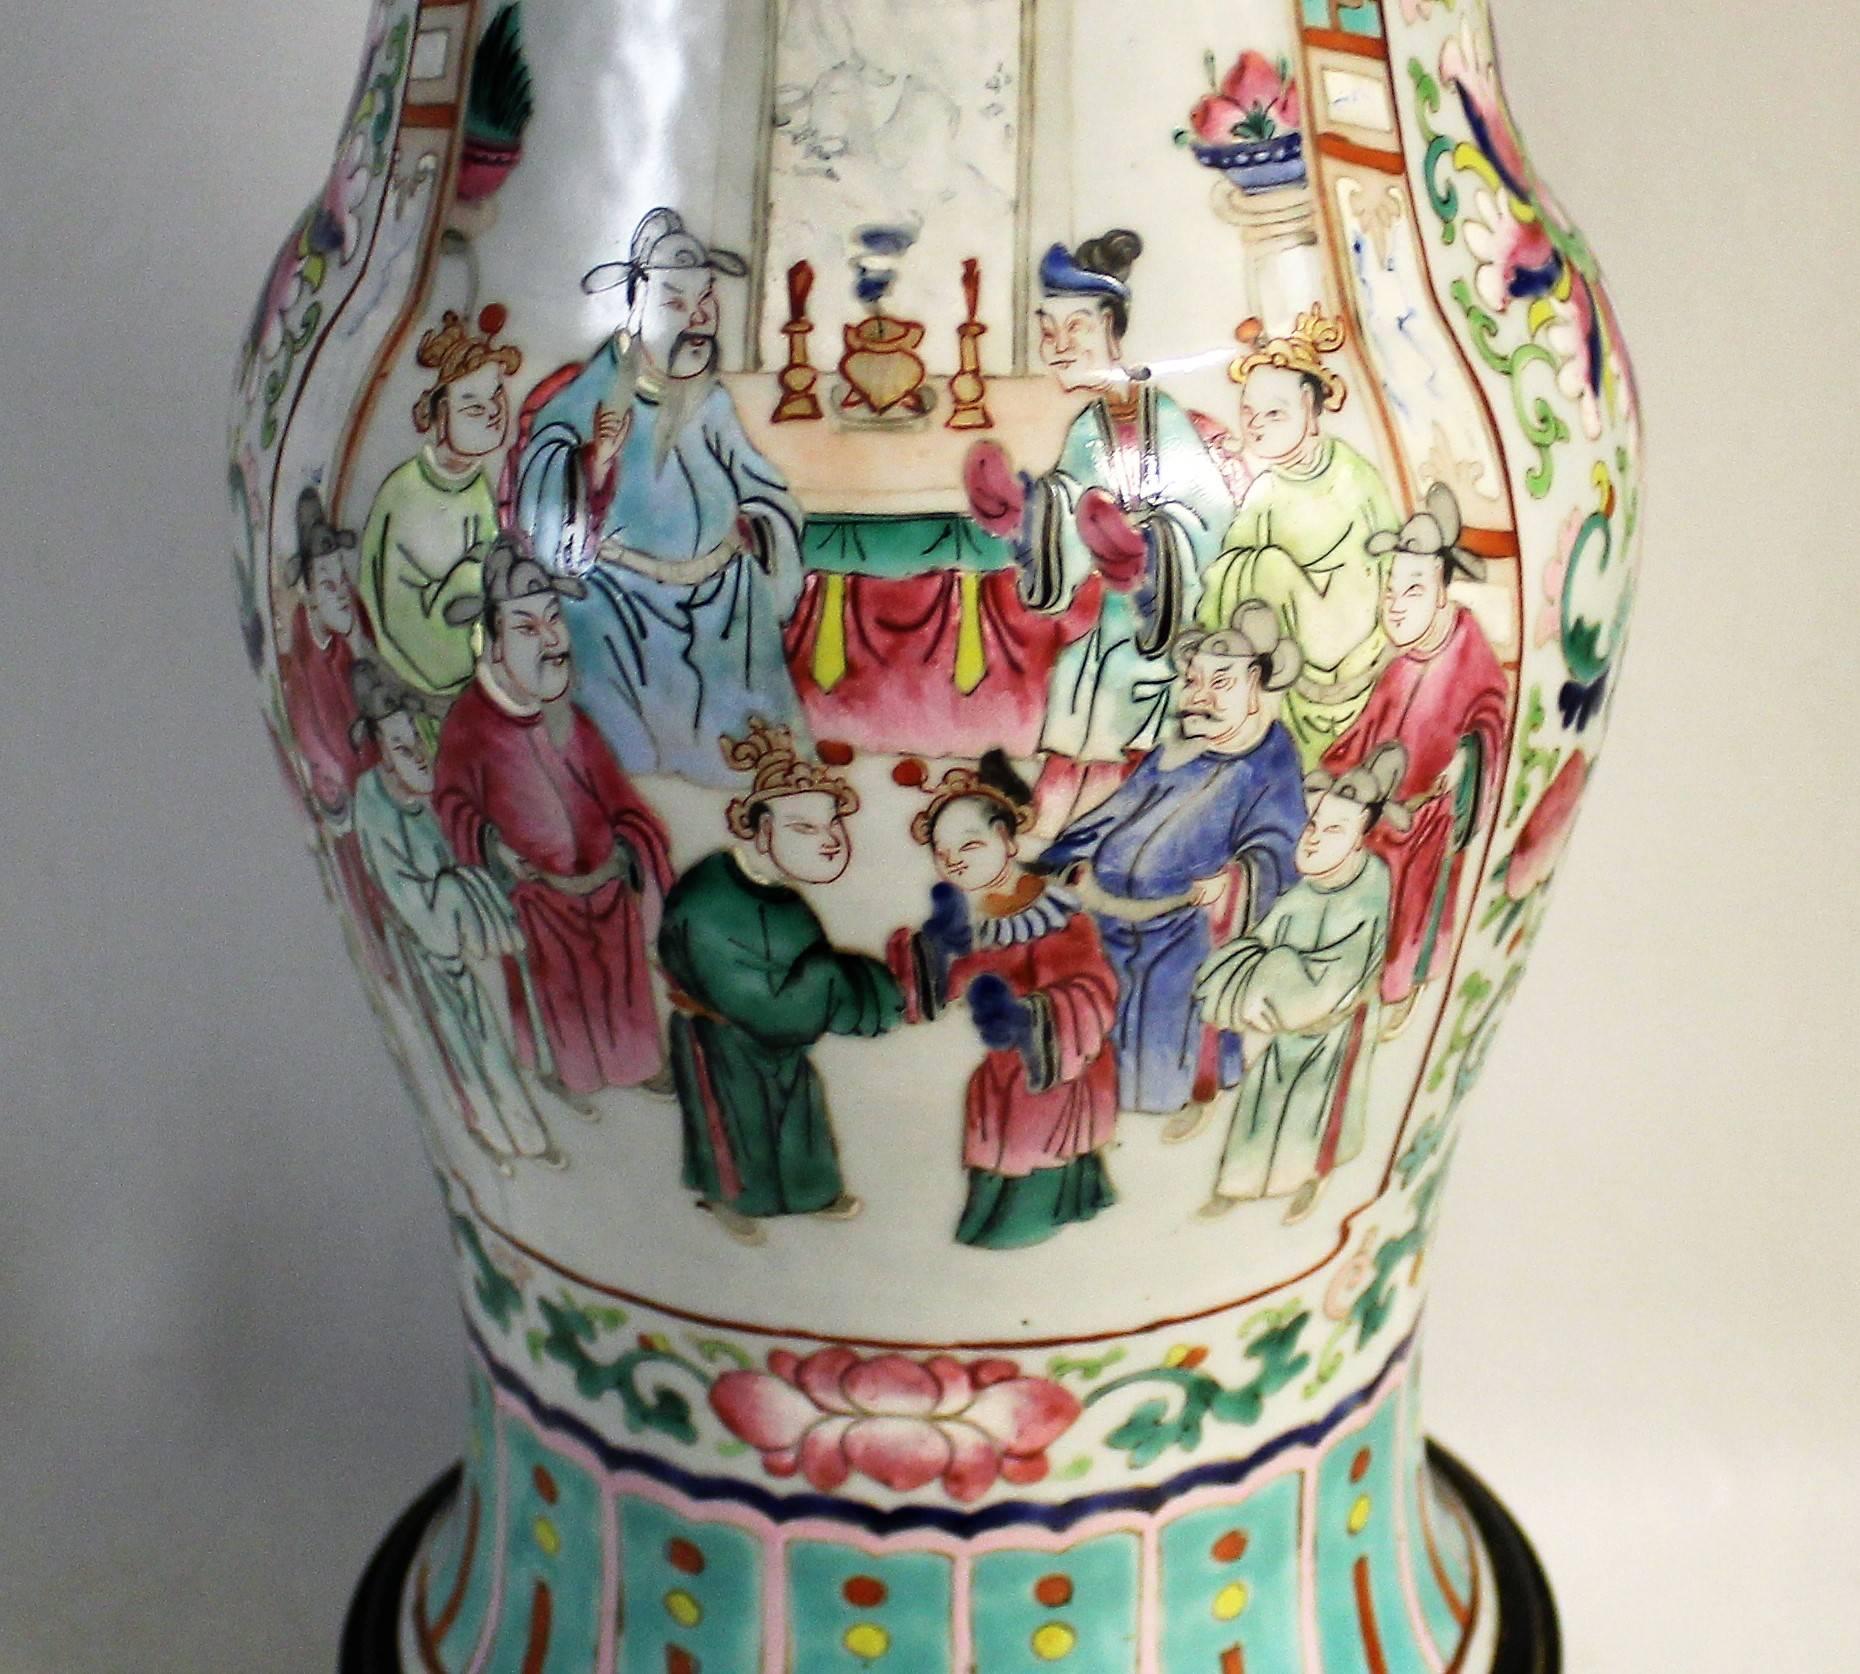 Early 20th Century, Chinese Porcelain Lamp In Good Condition For Sale In Hamilton, Ontario